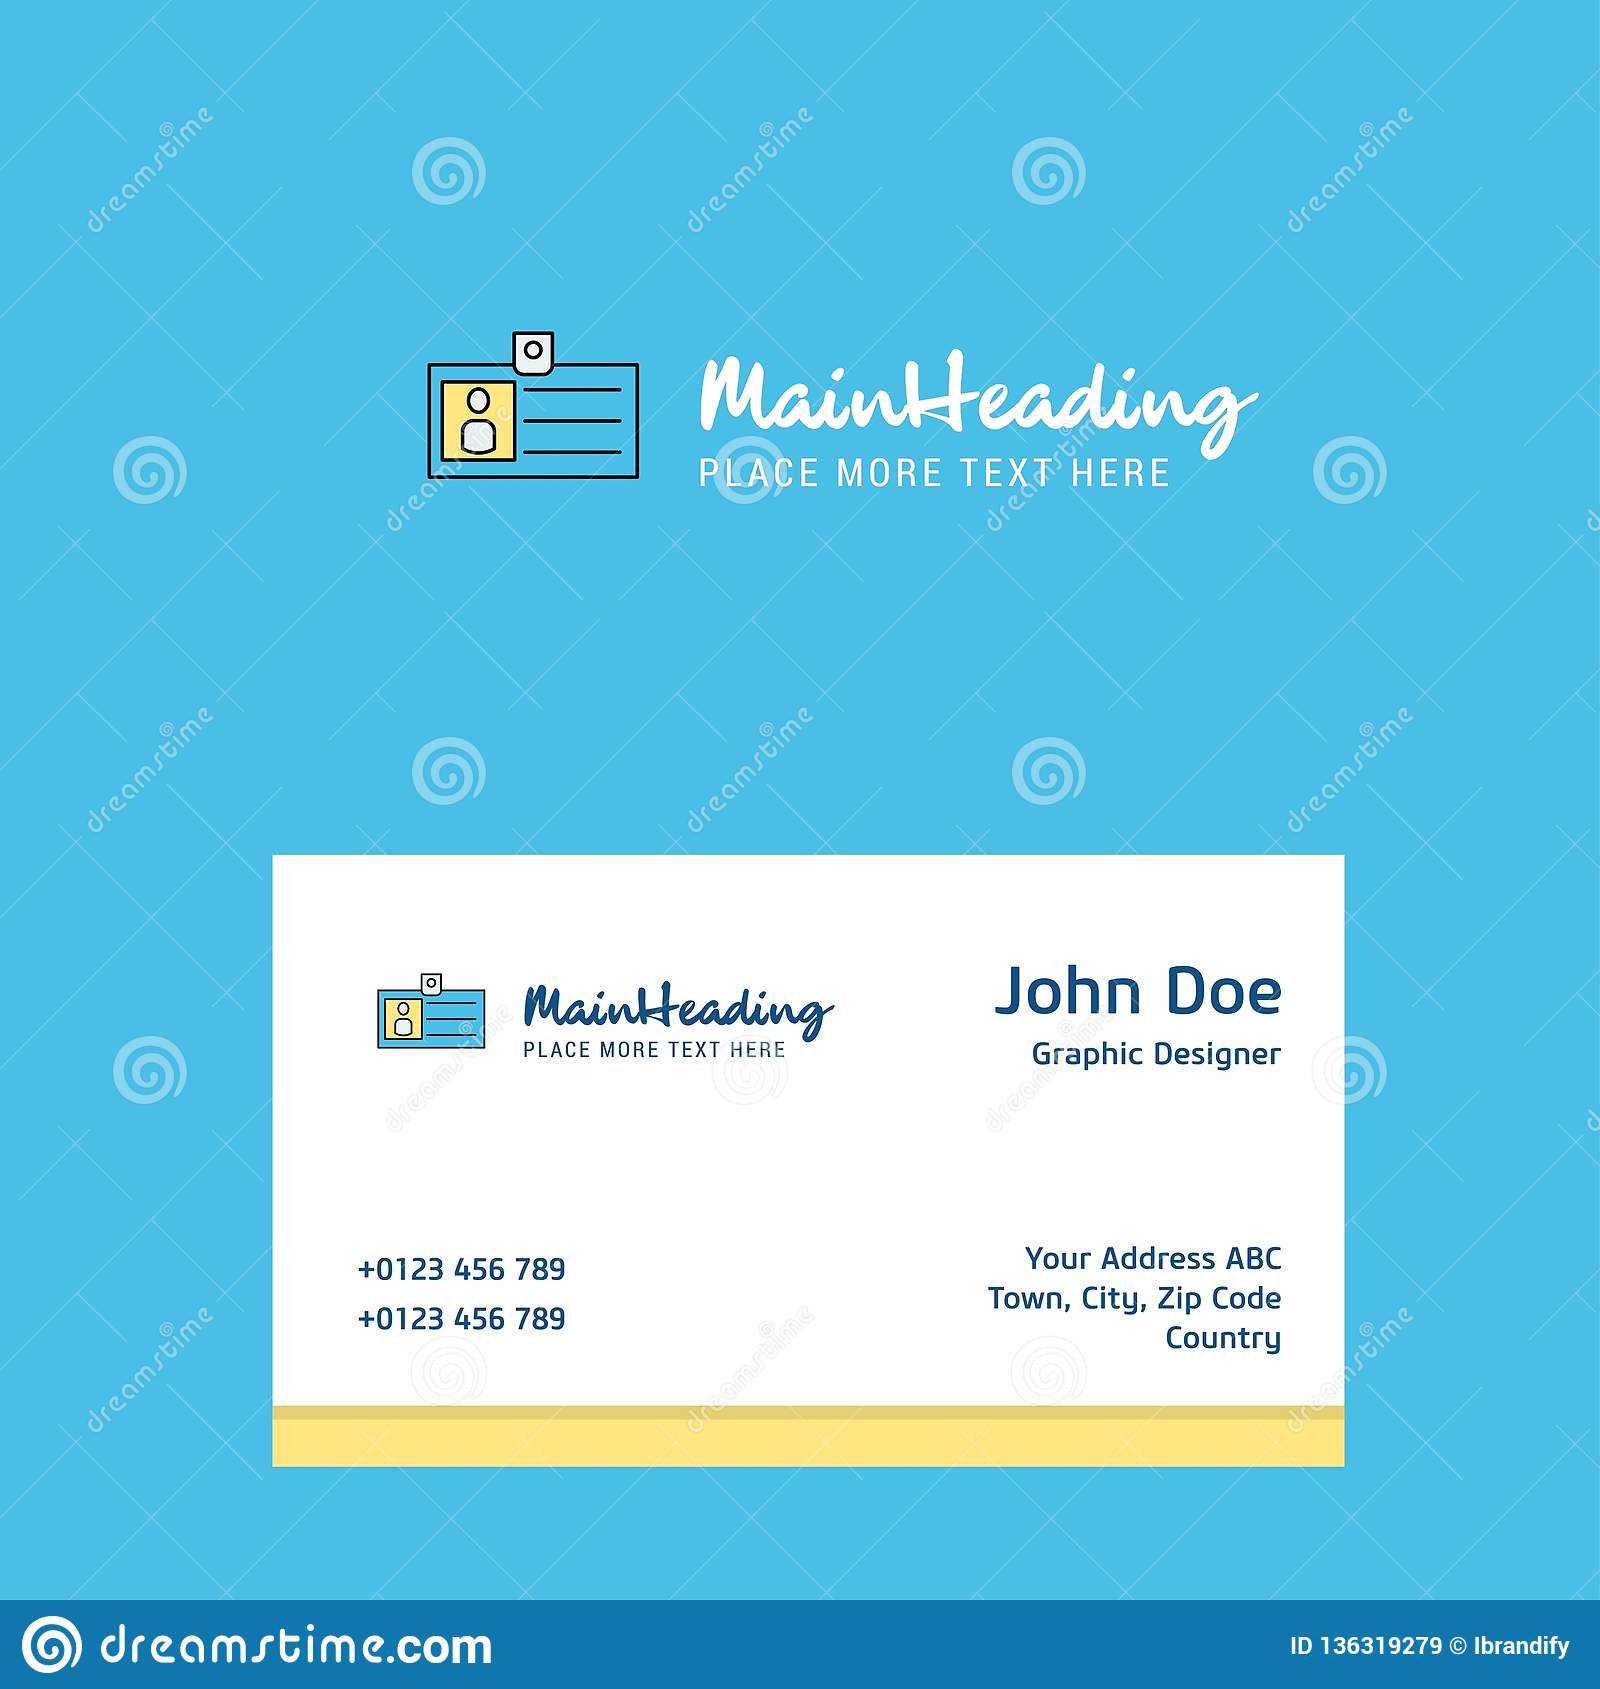 Id Card Logo Design With Business Card Template. Elegant Within Media Id Card Templates